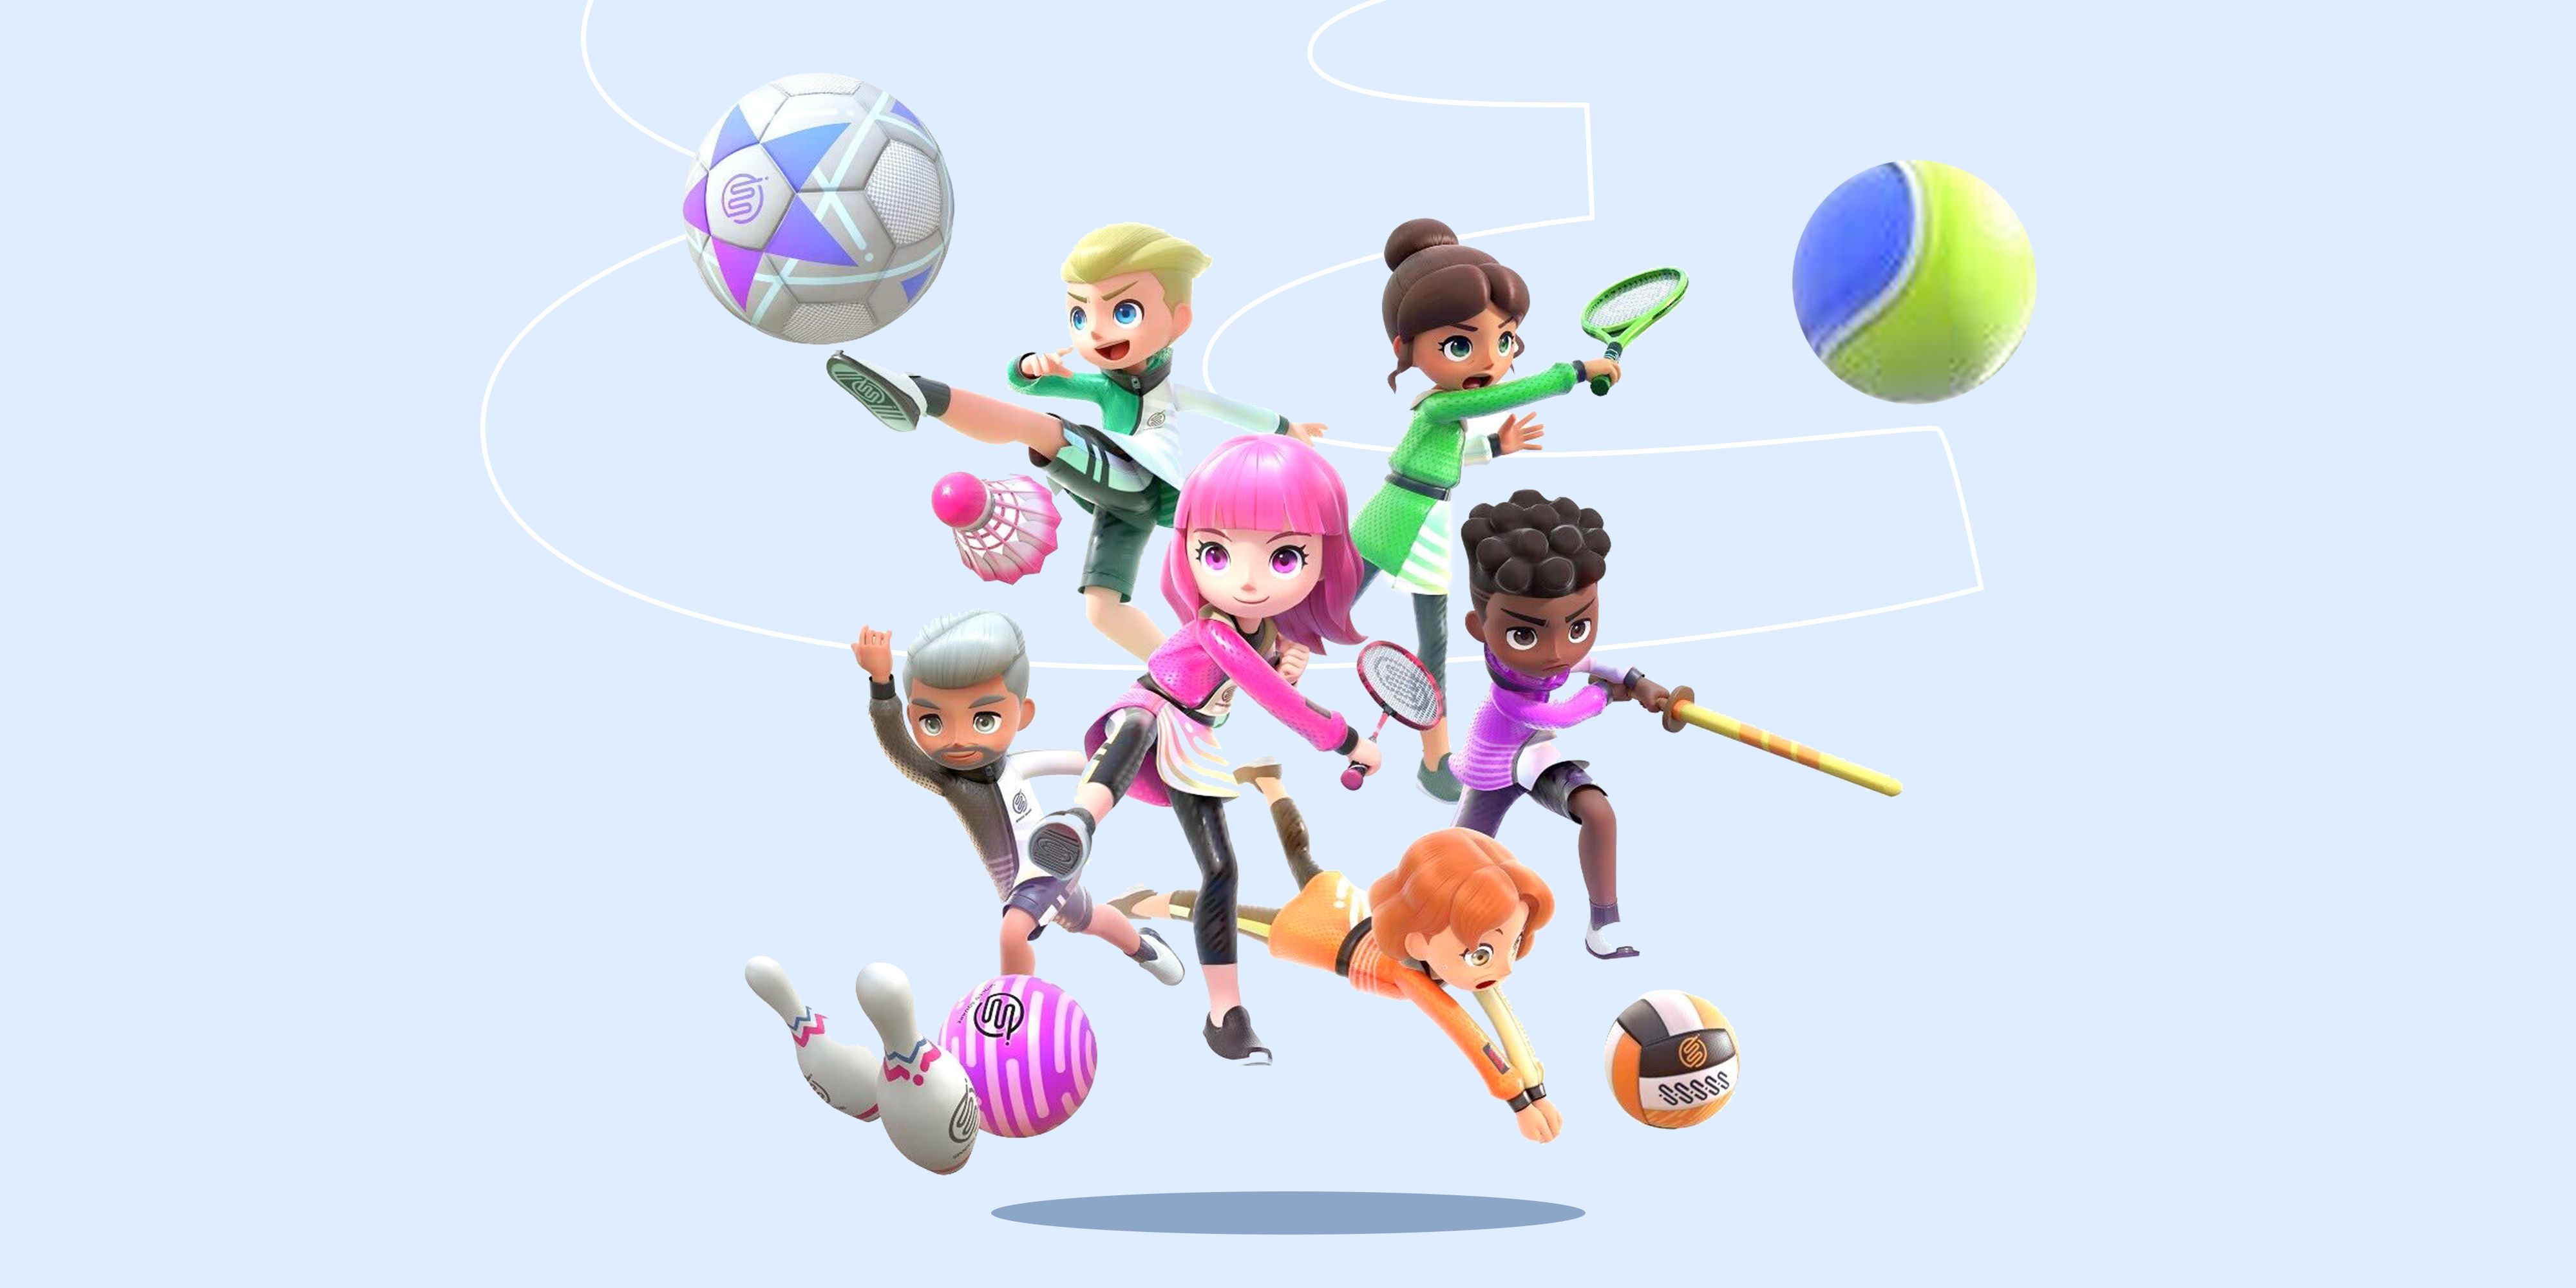 Nintendo Switch Sports Review - Wii Sports Sequel is the Perfect 